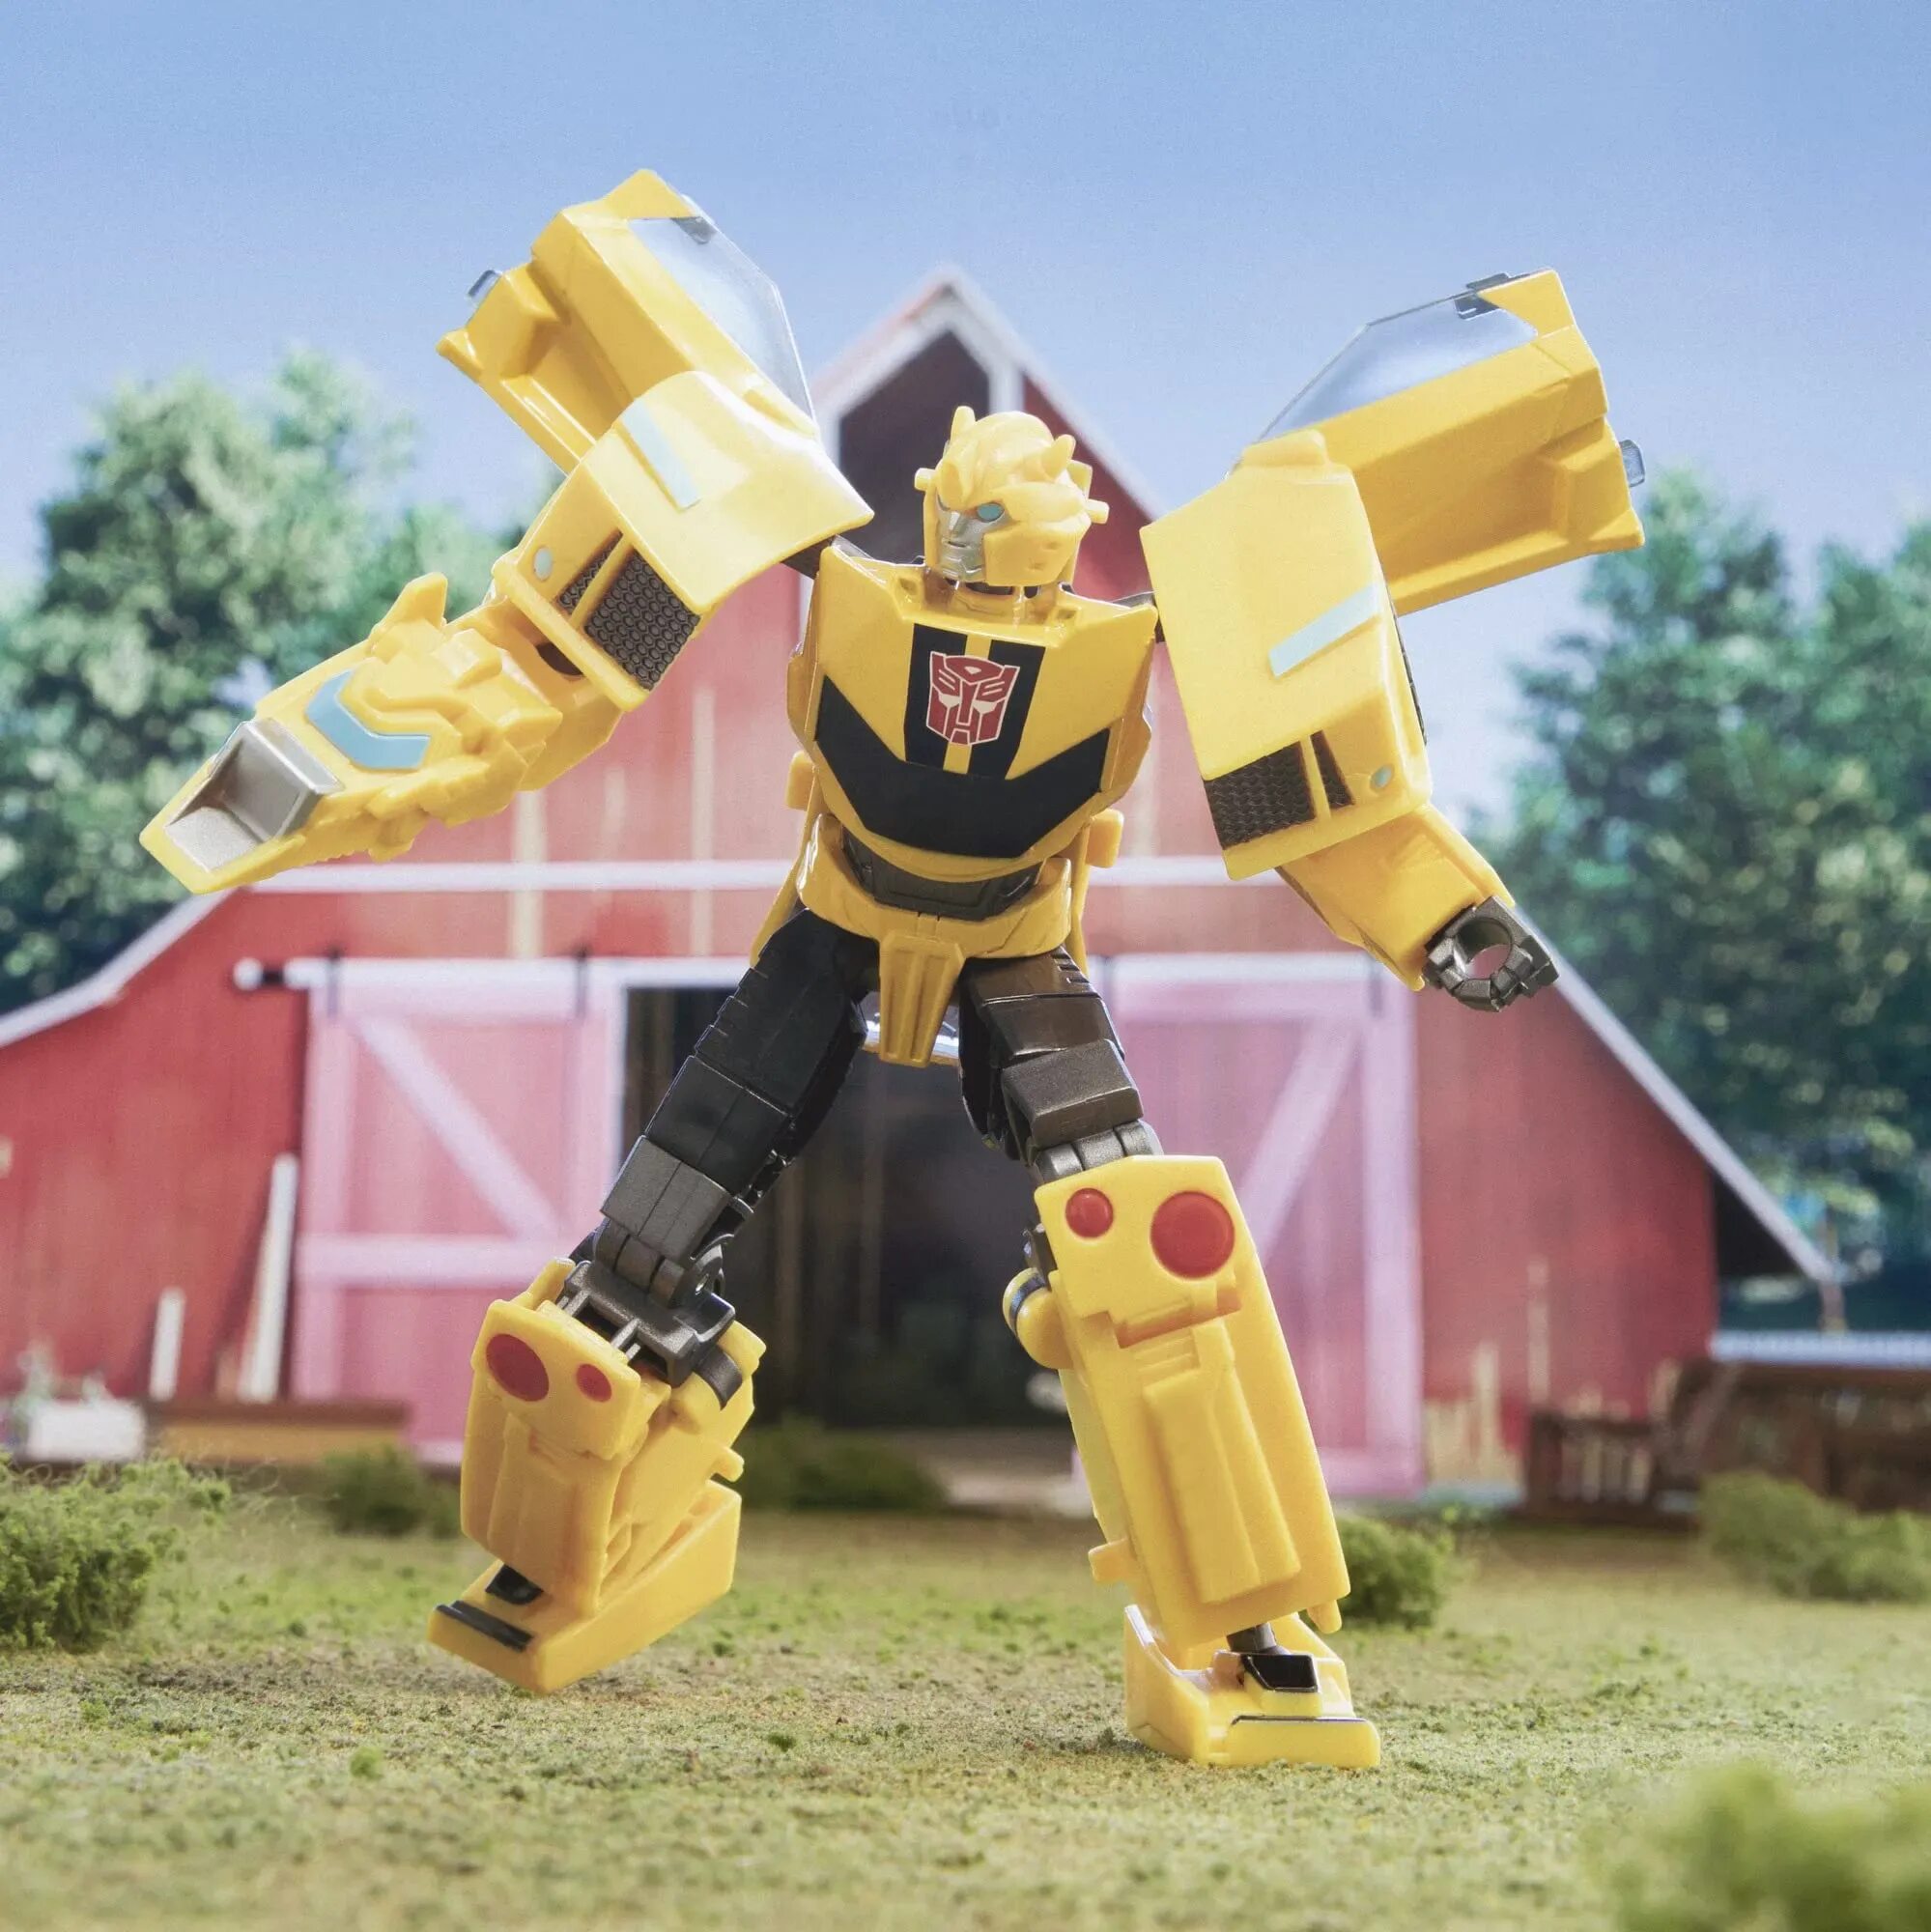 Transformers Earth Spark Bumblebee. Transformers EARTHSPARK Deluxe class Бамблби. Transformers Earth Spark 2022. Transformers Earth Spark Bumblebee Figure. Transformers earthspark